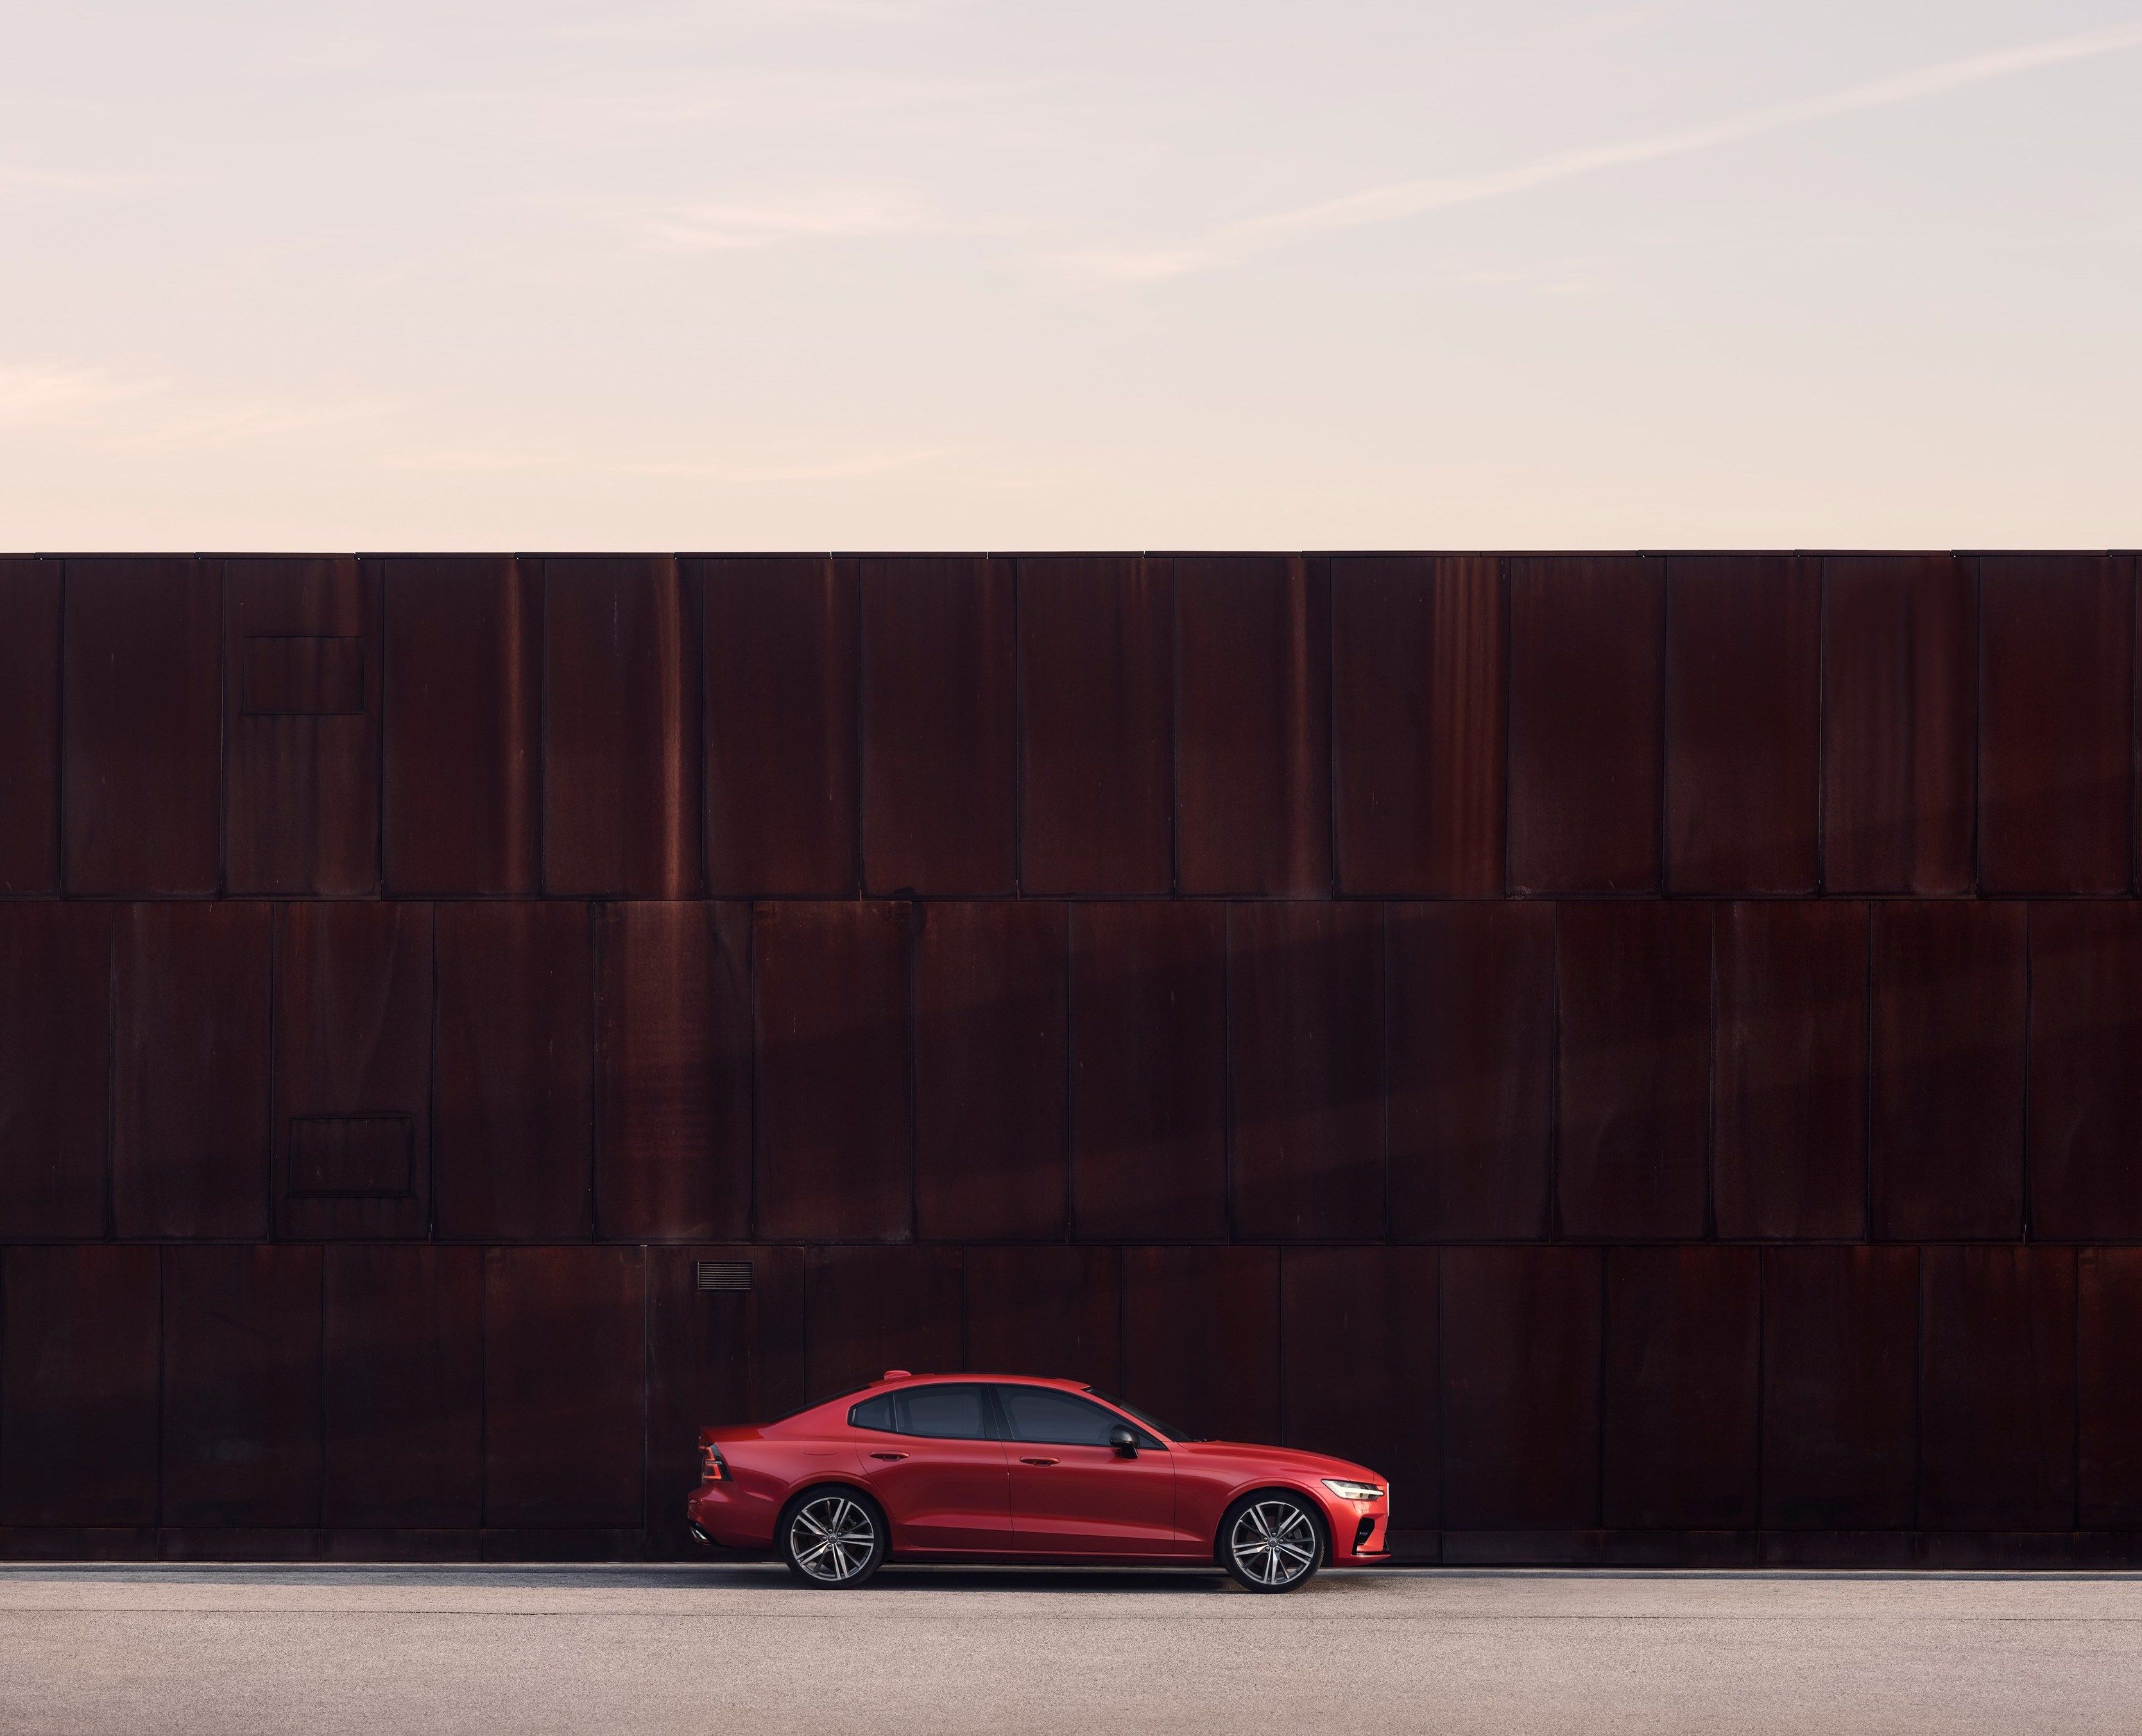 The 2019 Volvo S60, Lexus’ new sporty sedan, and more new rides this month